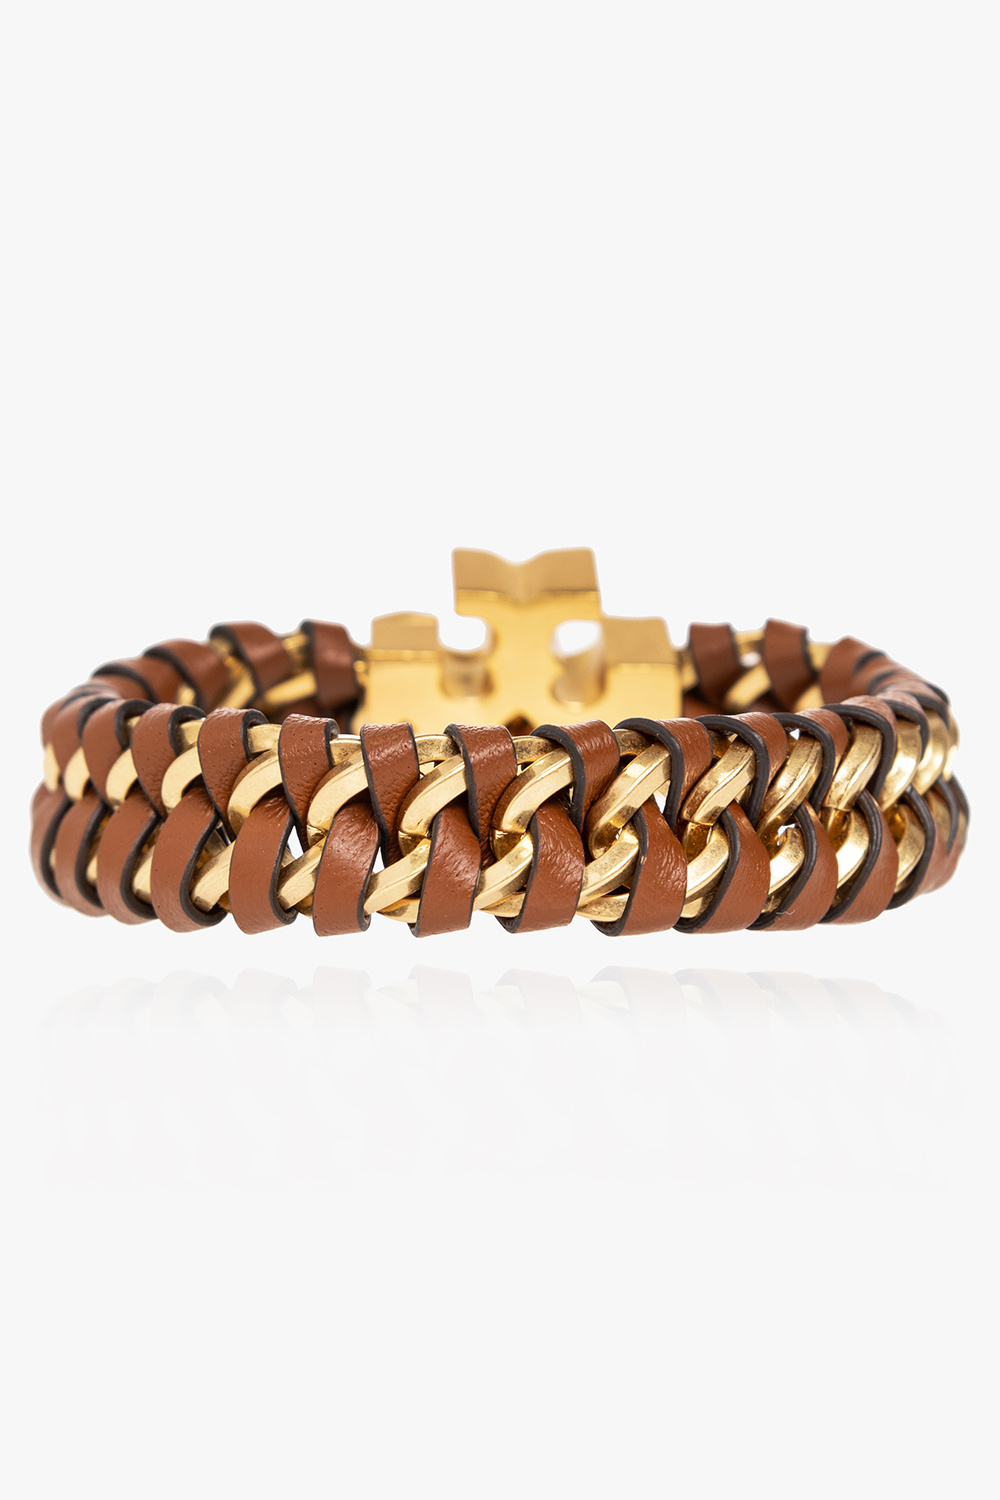 Tory Burch ‘Roxanne’ bracelet with woven leather